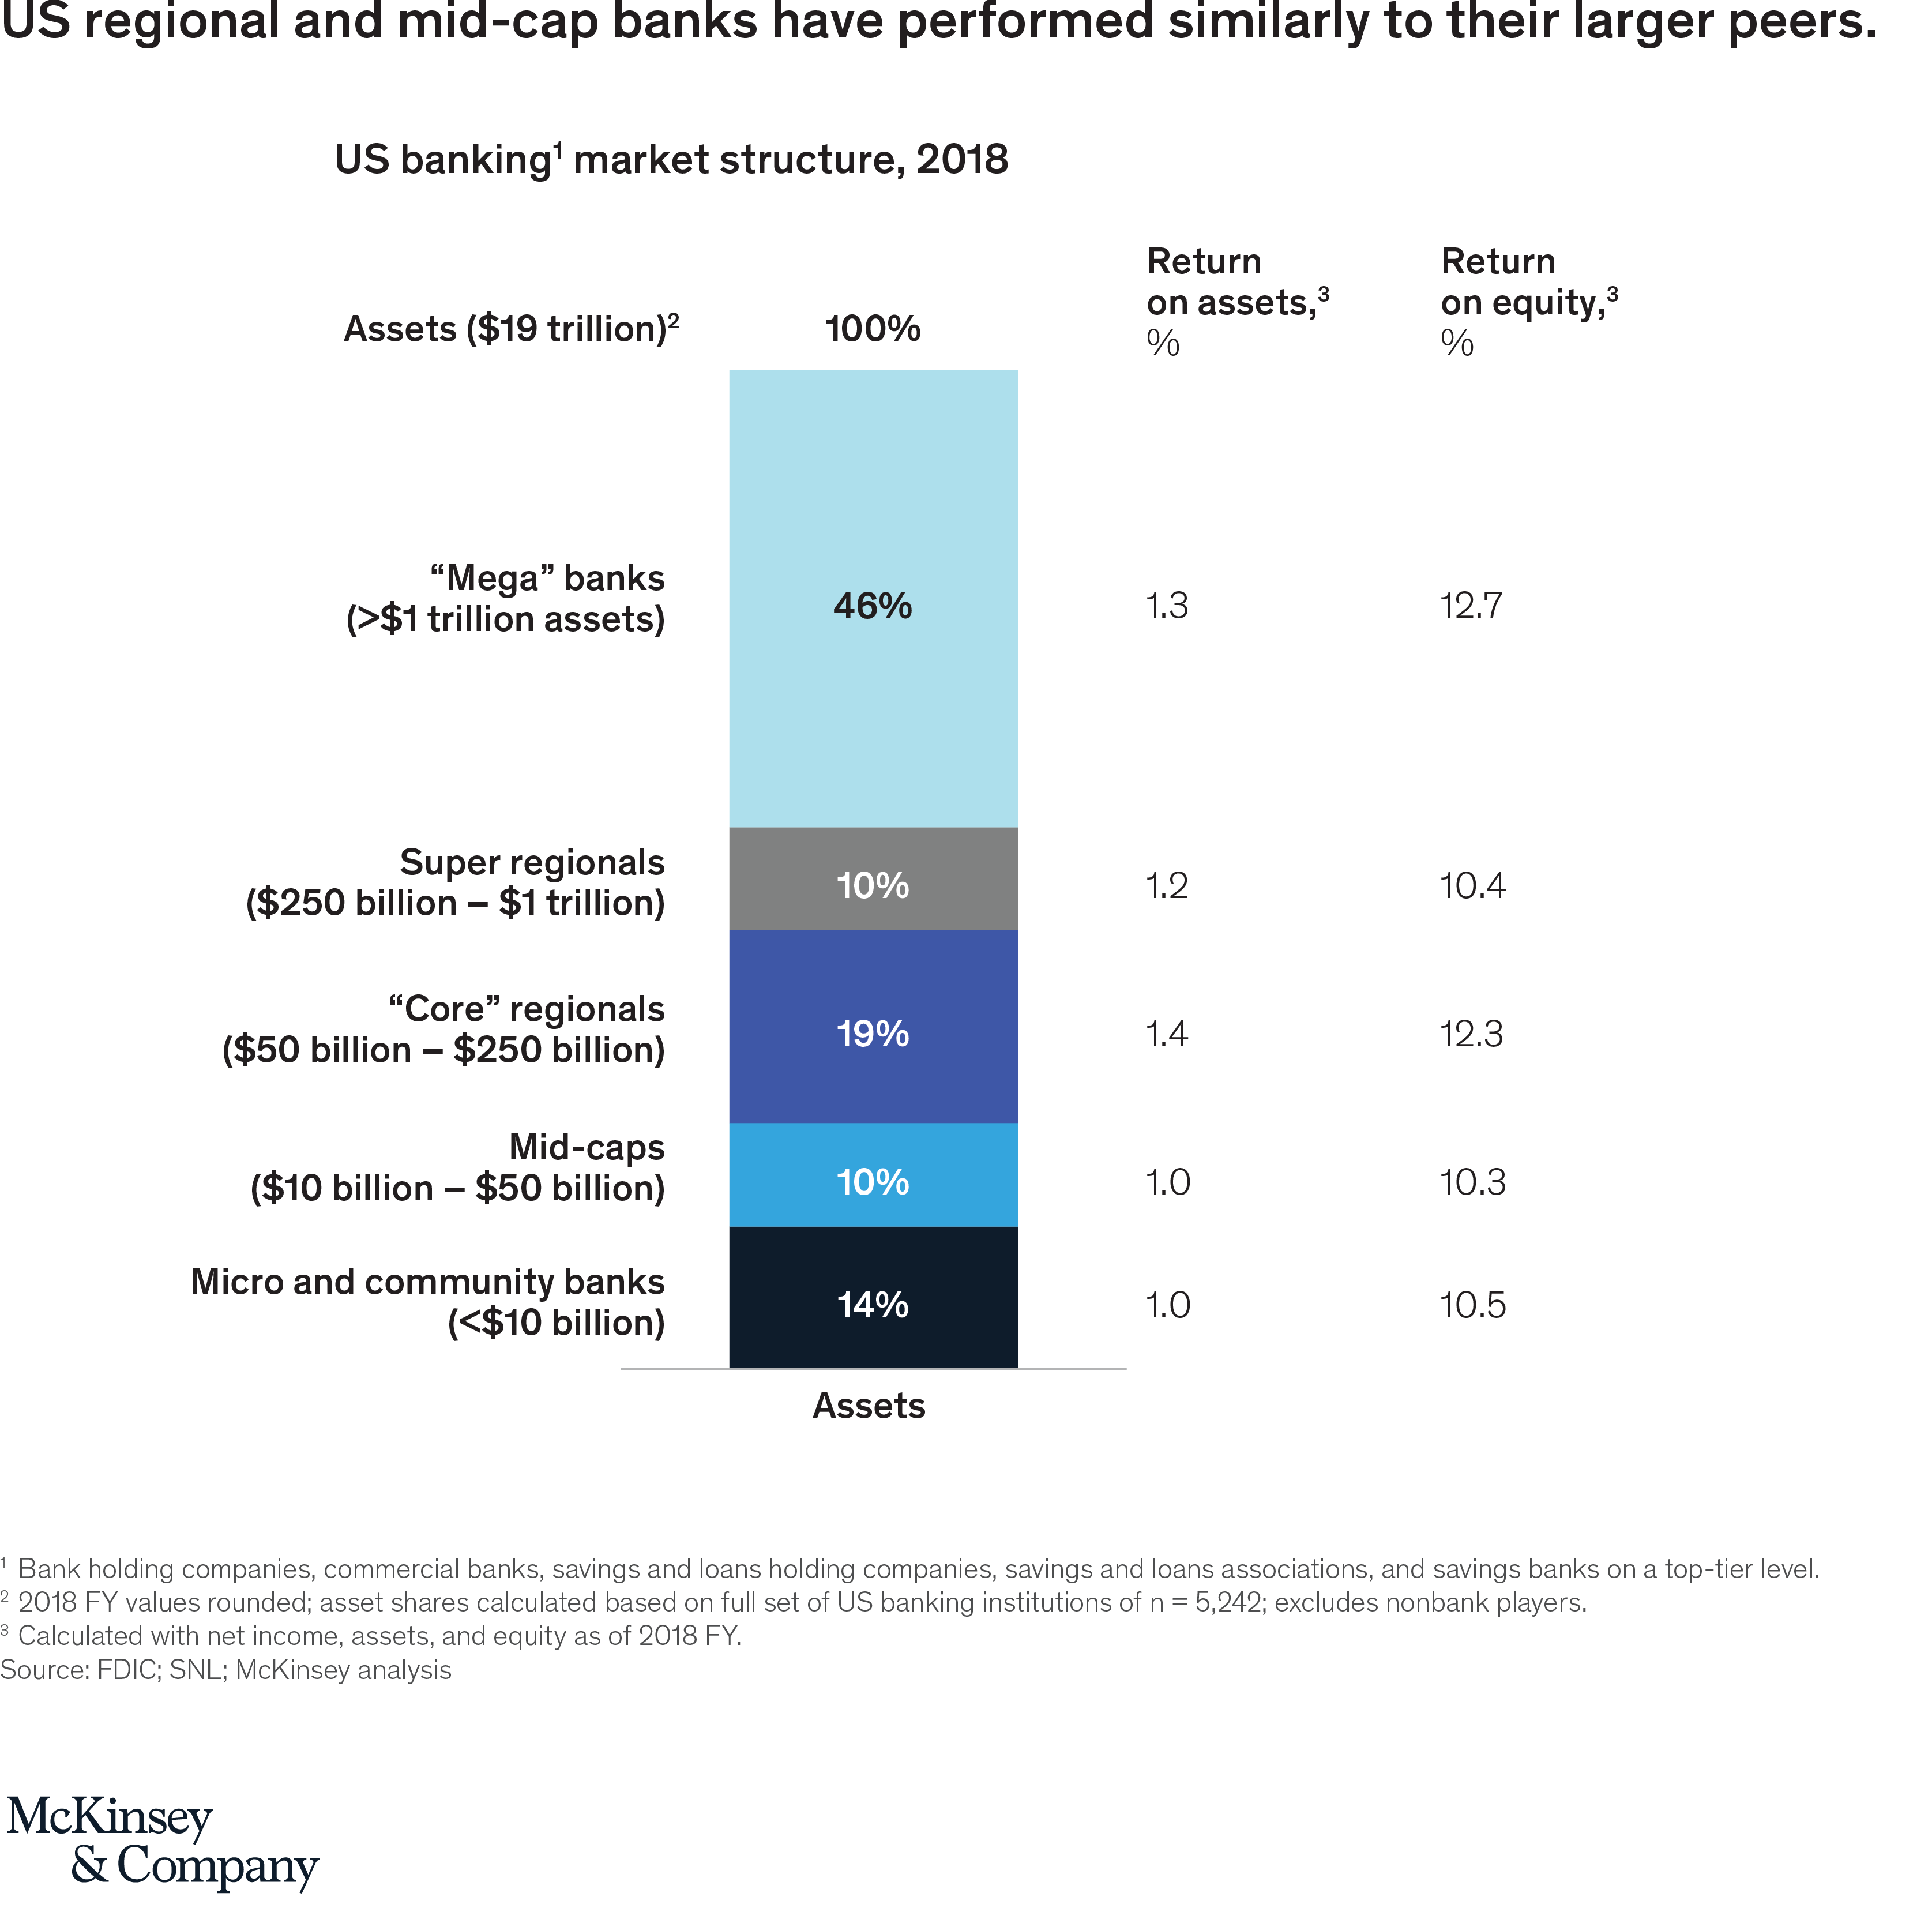 Six keys to success for US regional and midcap banks